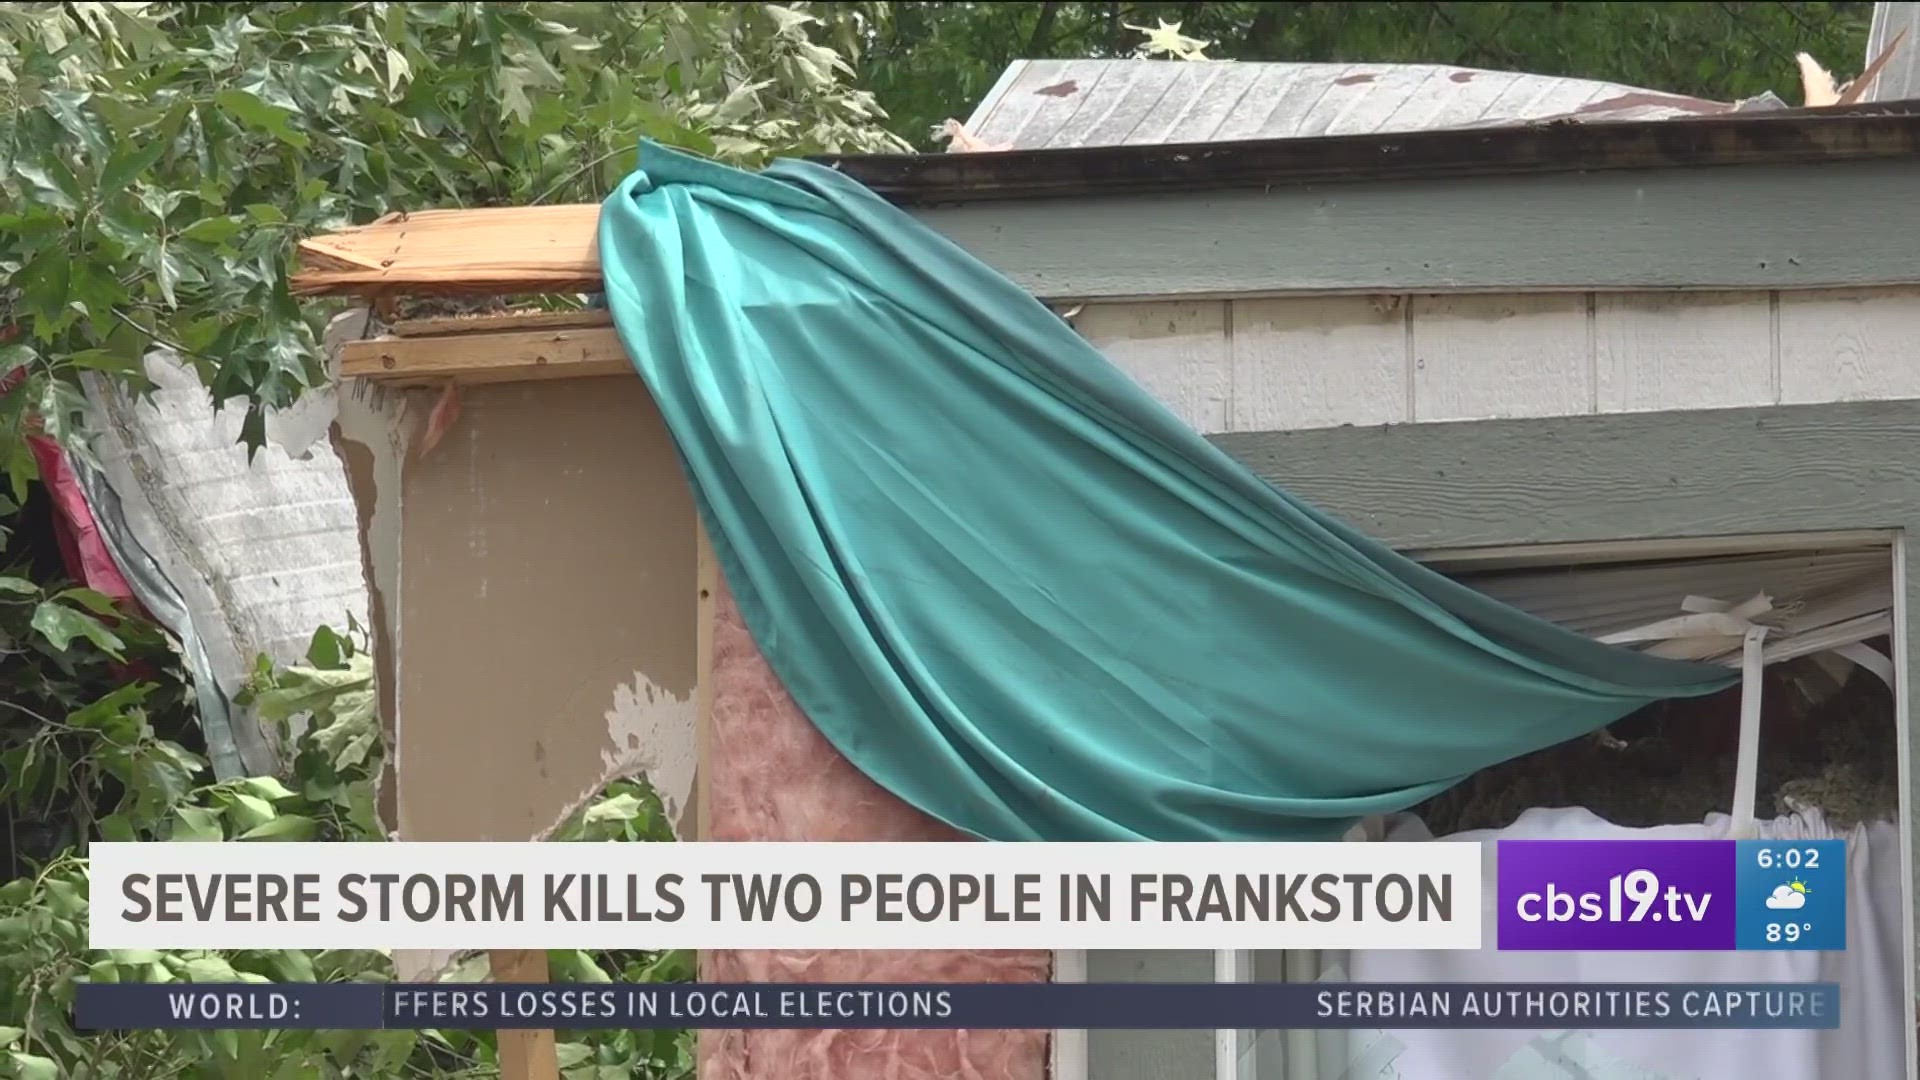 Frankston community comes together after severe storm leaves 2 dead,  causes significant damage